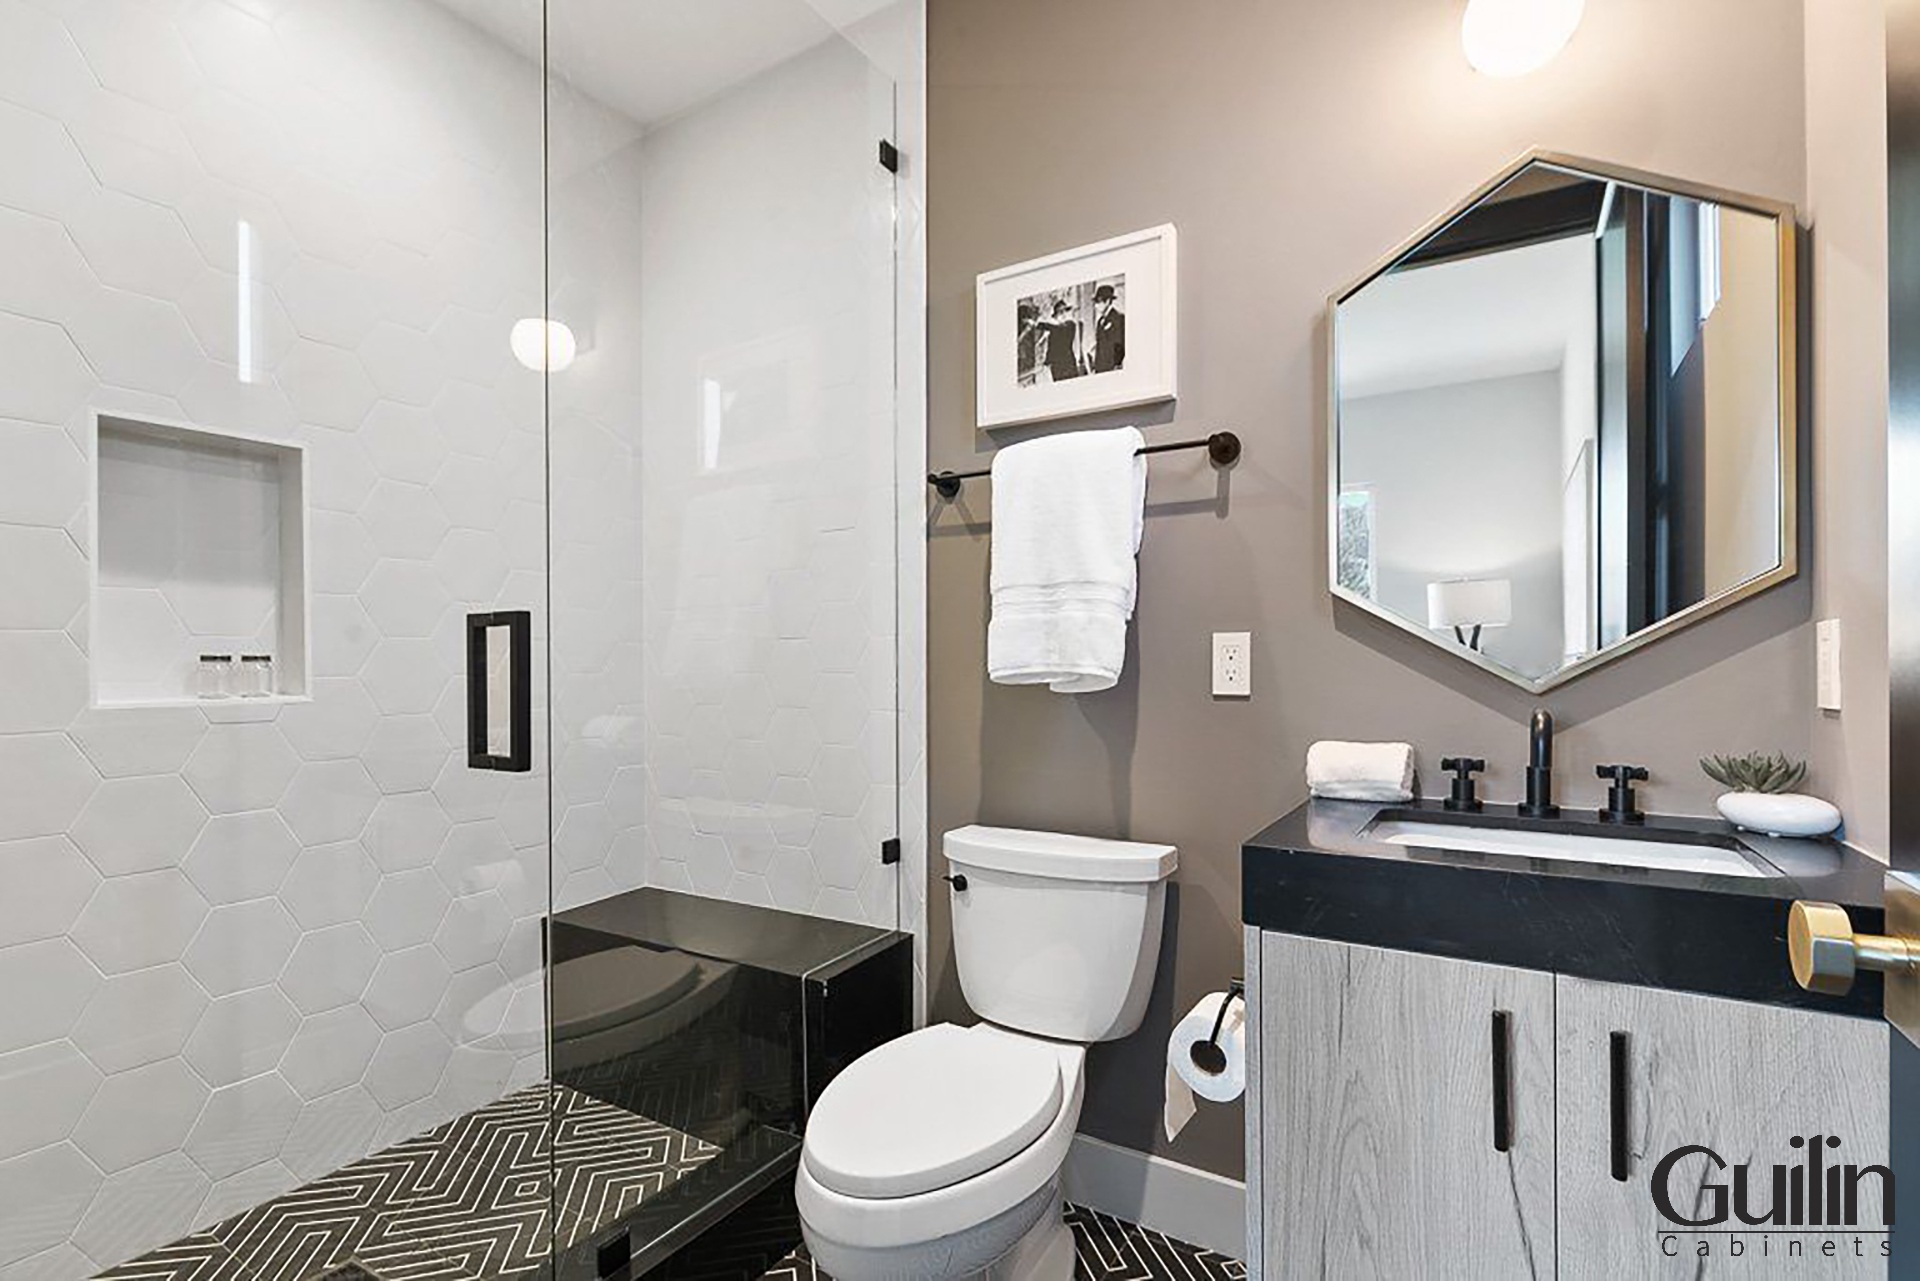 The height is a crucial factor to consider when you want to install the new towel bars.